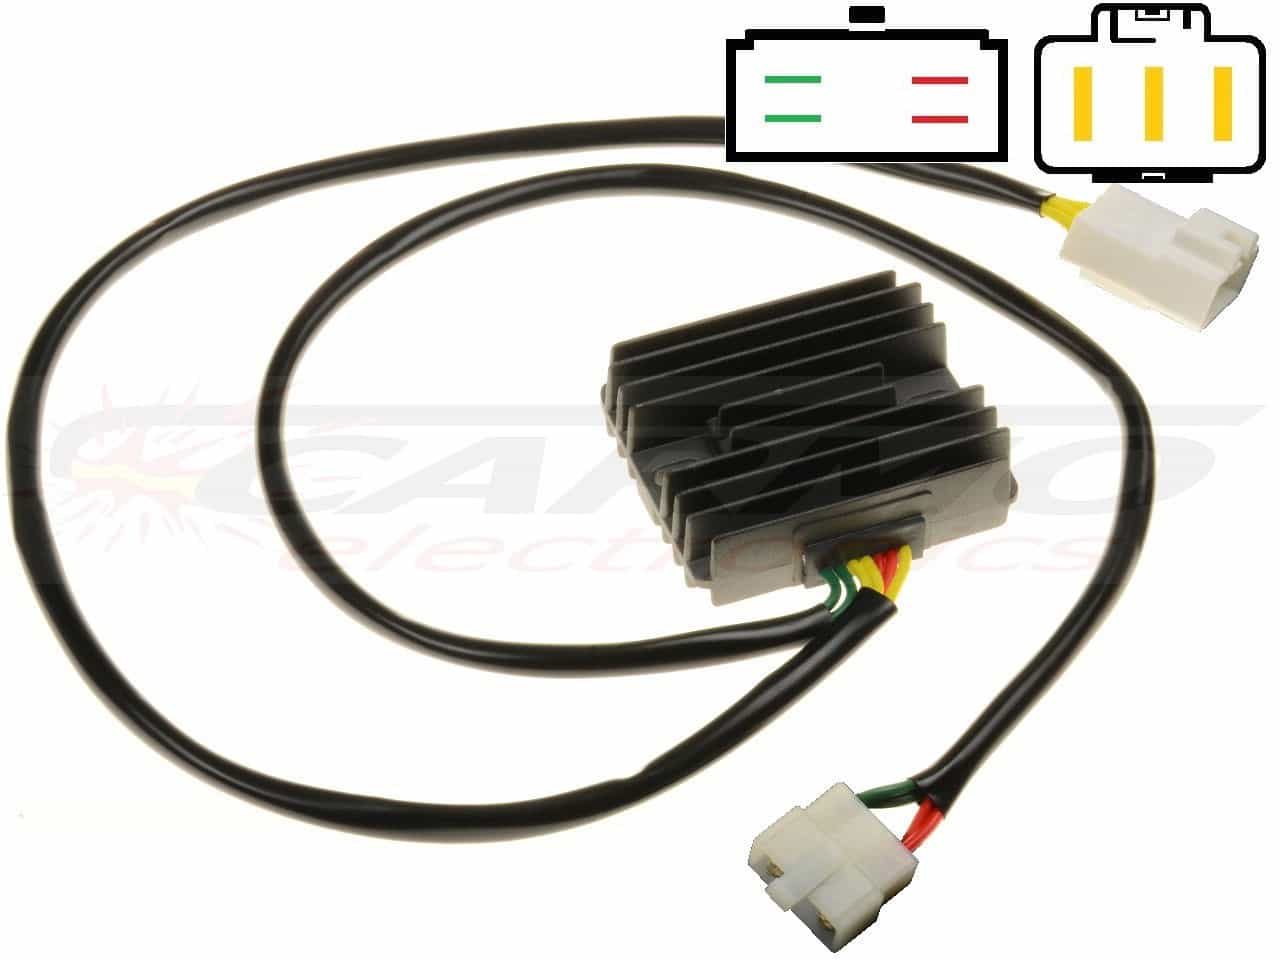 CARR691 with 75cm lead Honda CBR600 MOSFET Voltage regulator rectifier - Click Image to Close